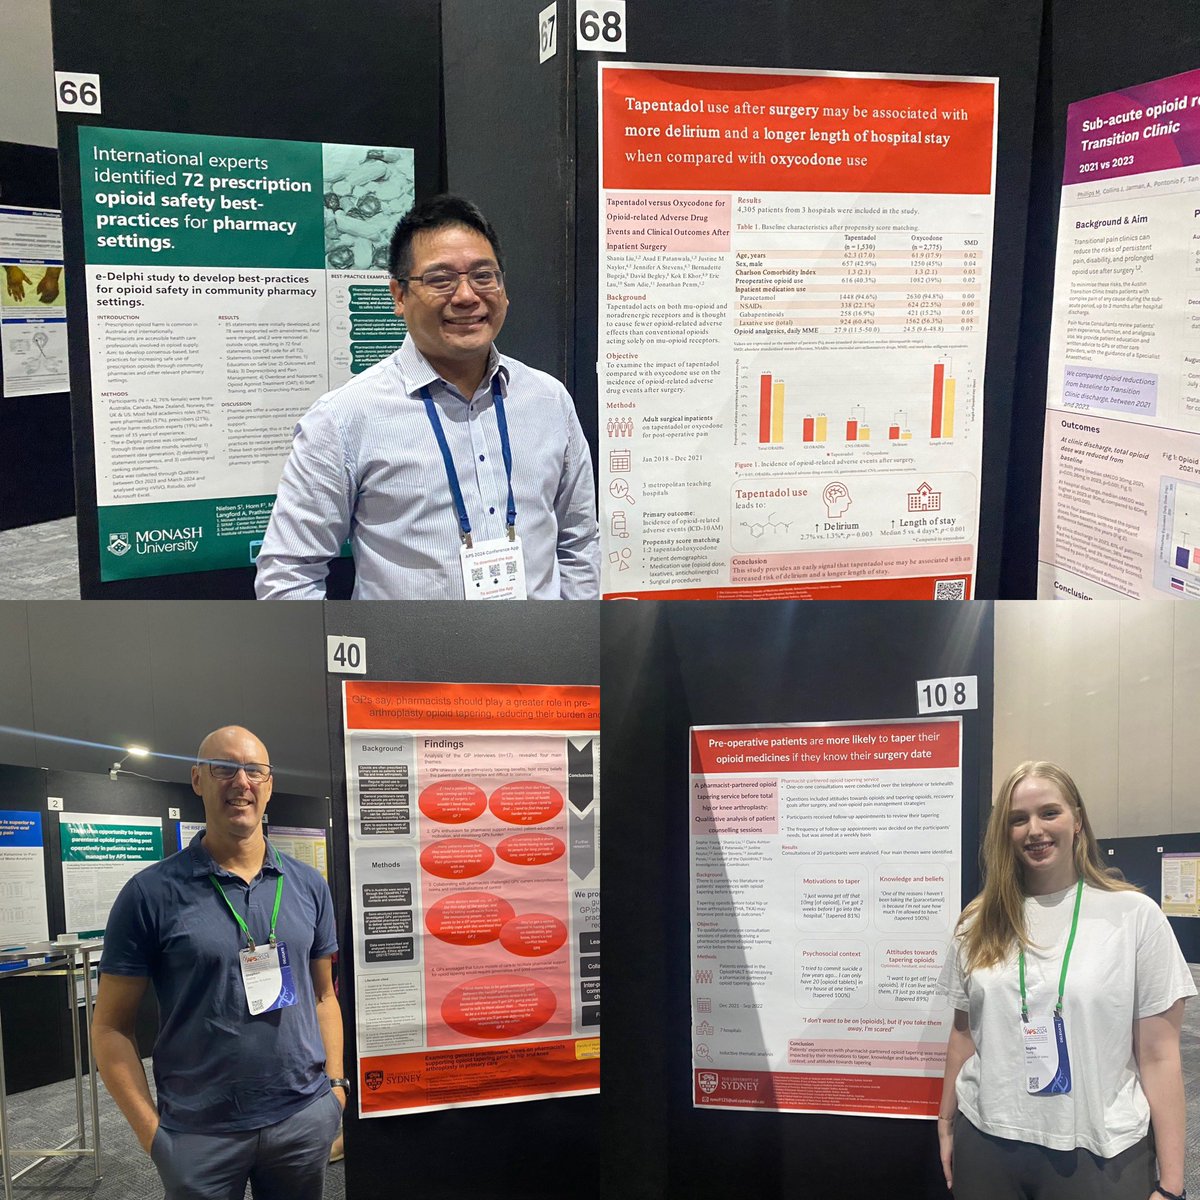 Come see our posters from my @Sydney_Uni #Pharmacy team about #tapentadol (Poster 68) and #pharmacist partnered opioid tapering before surgery (Poster 40 & 108) #AusPainSoc @AusPainSoc